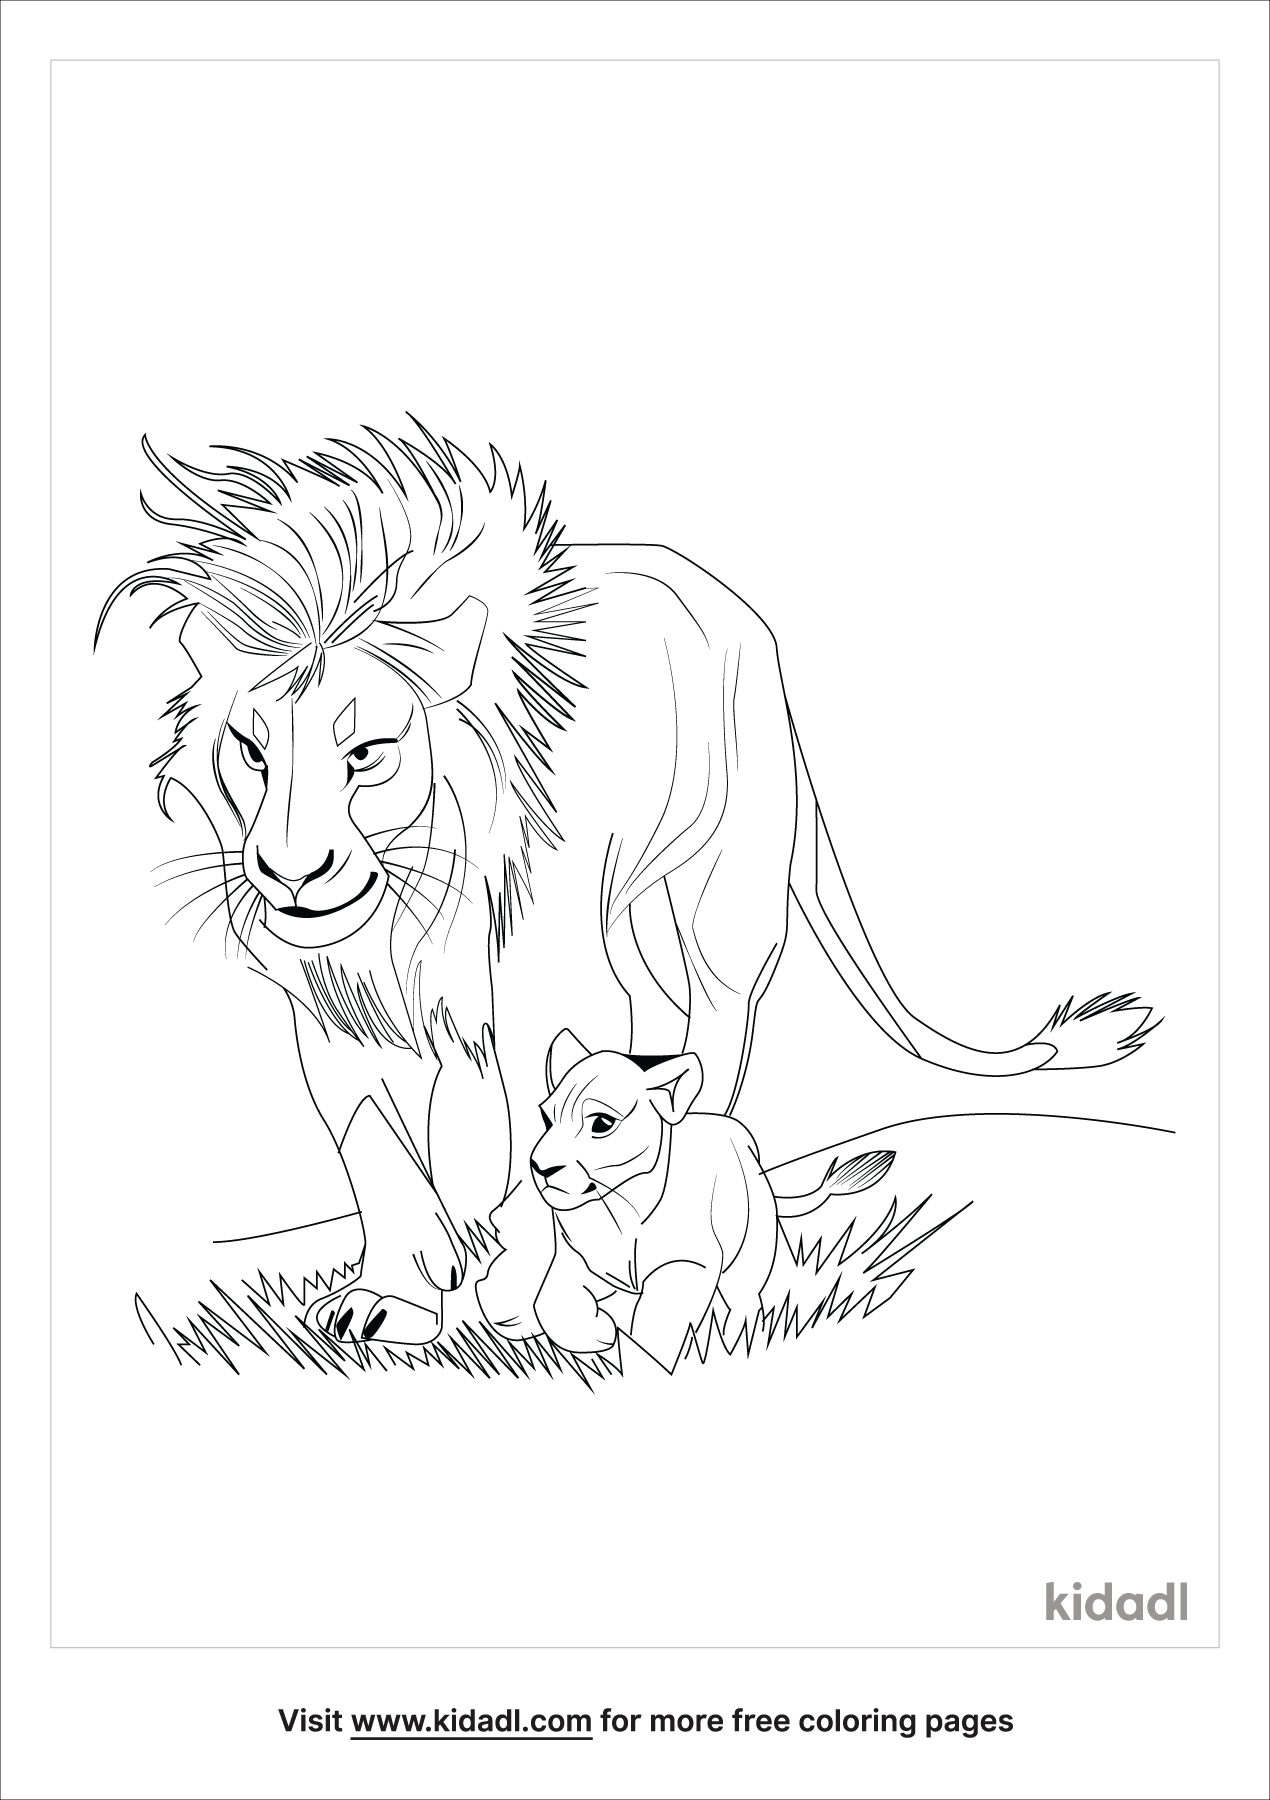 Cute Coloring Pages Free Animals Coloring Pages Kidadl